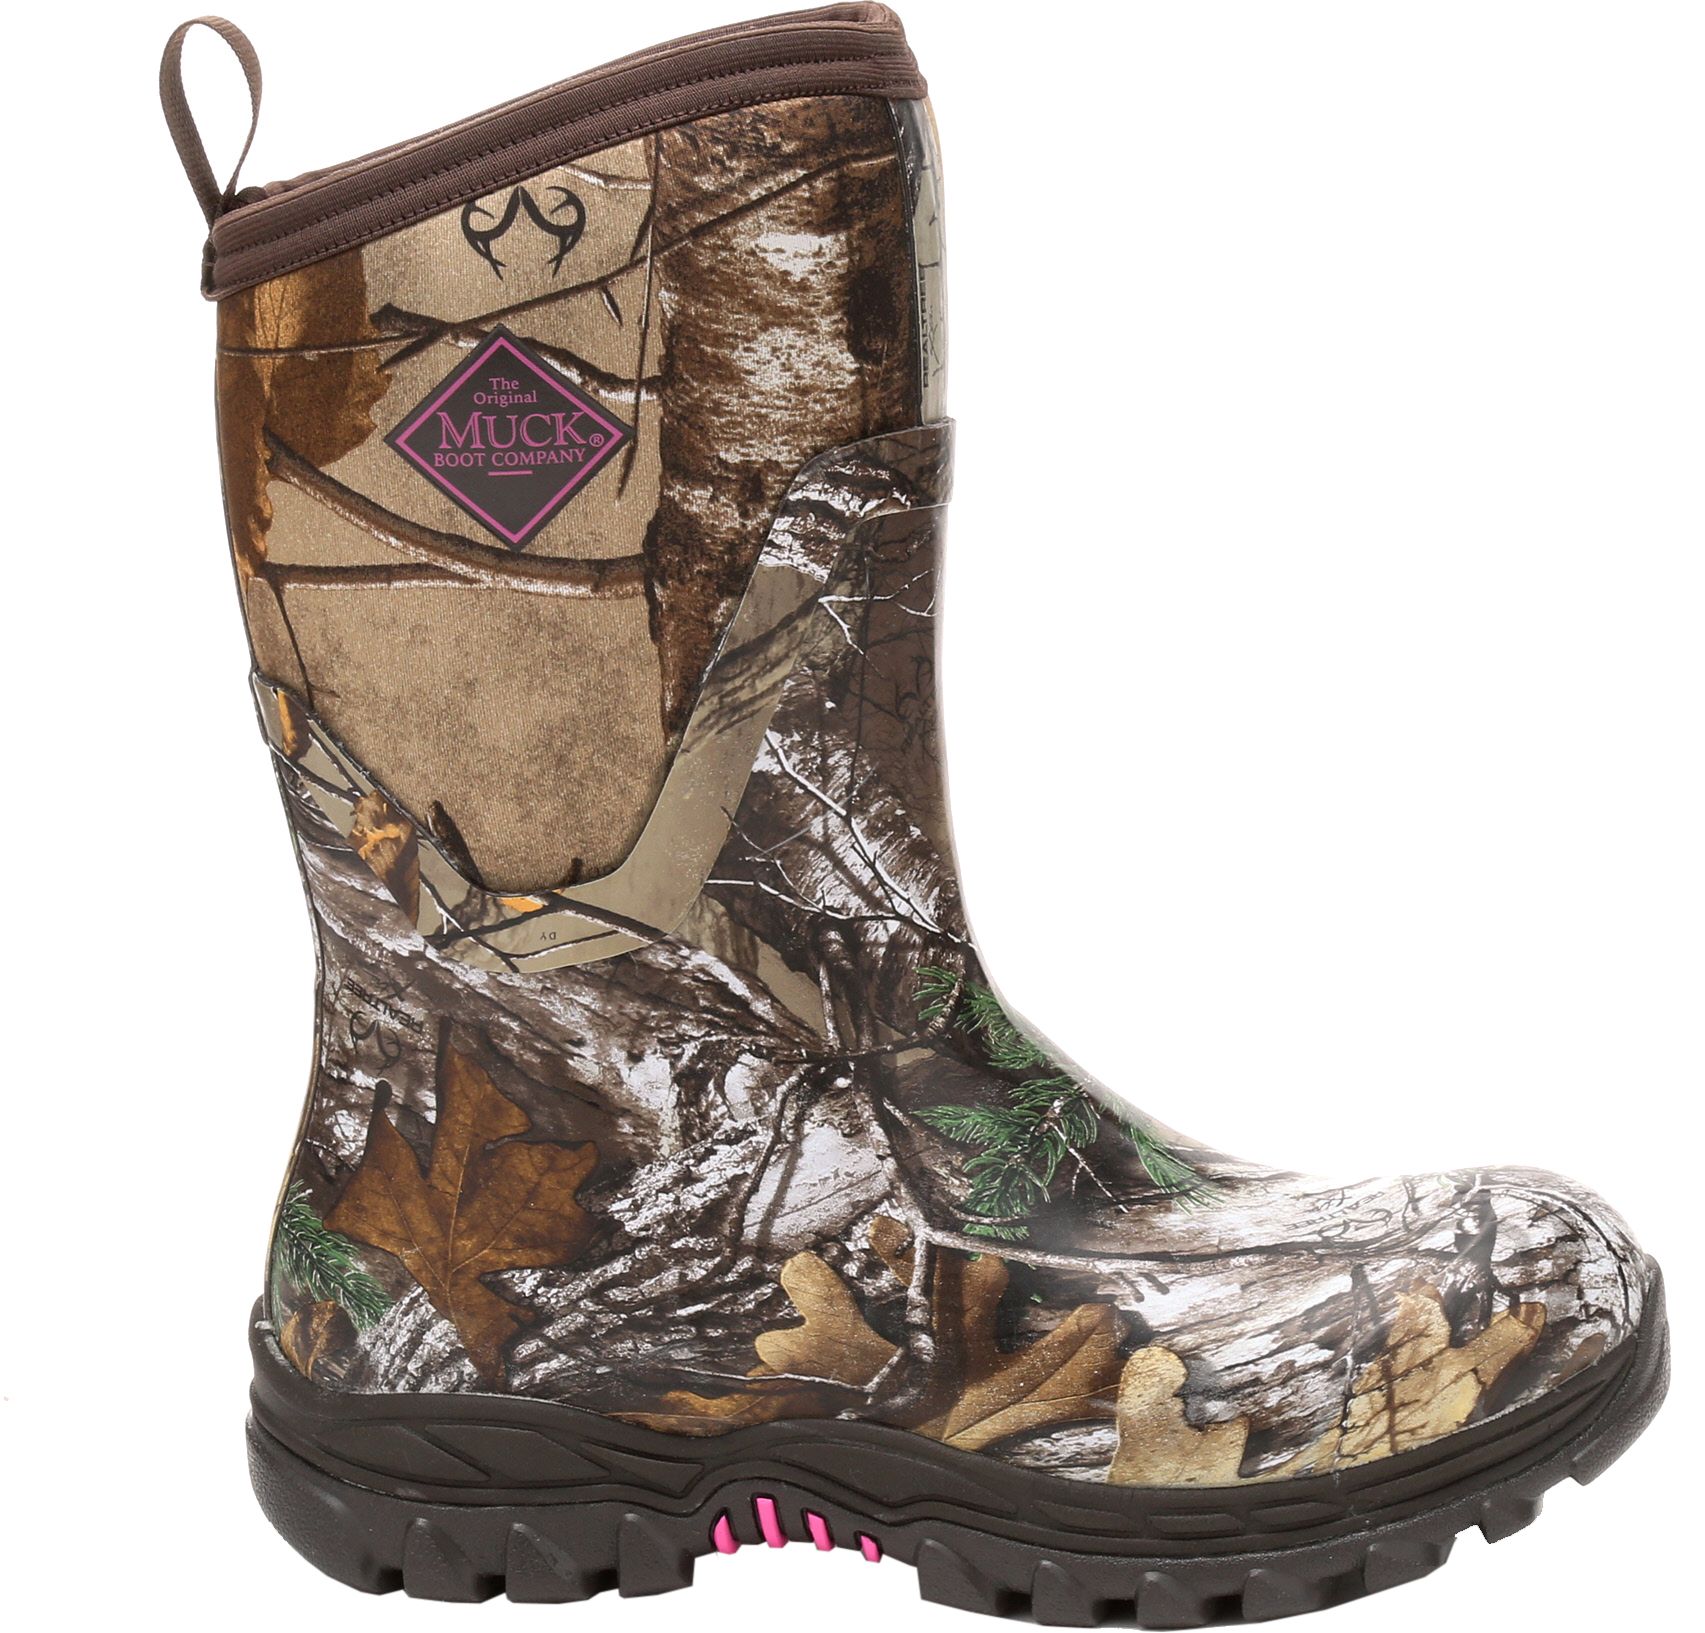 womens camo muck boots clearance